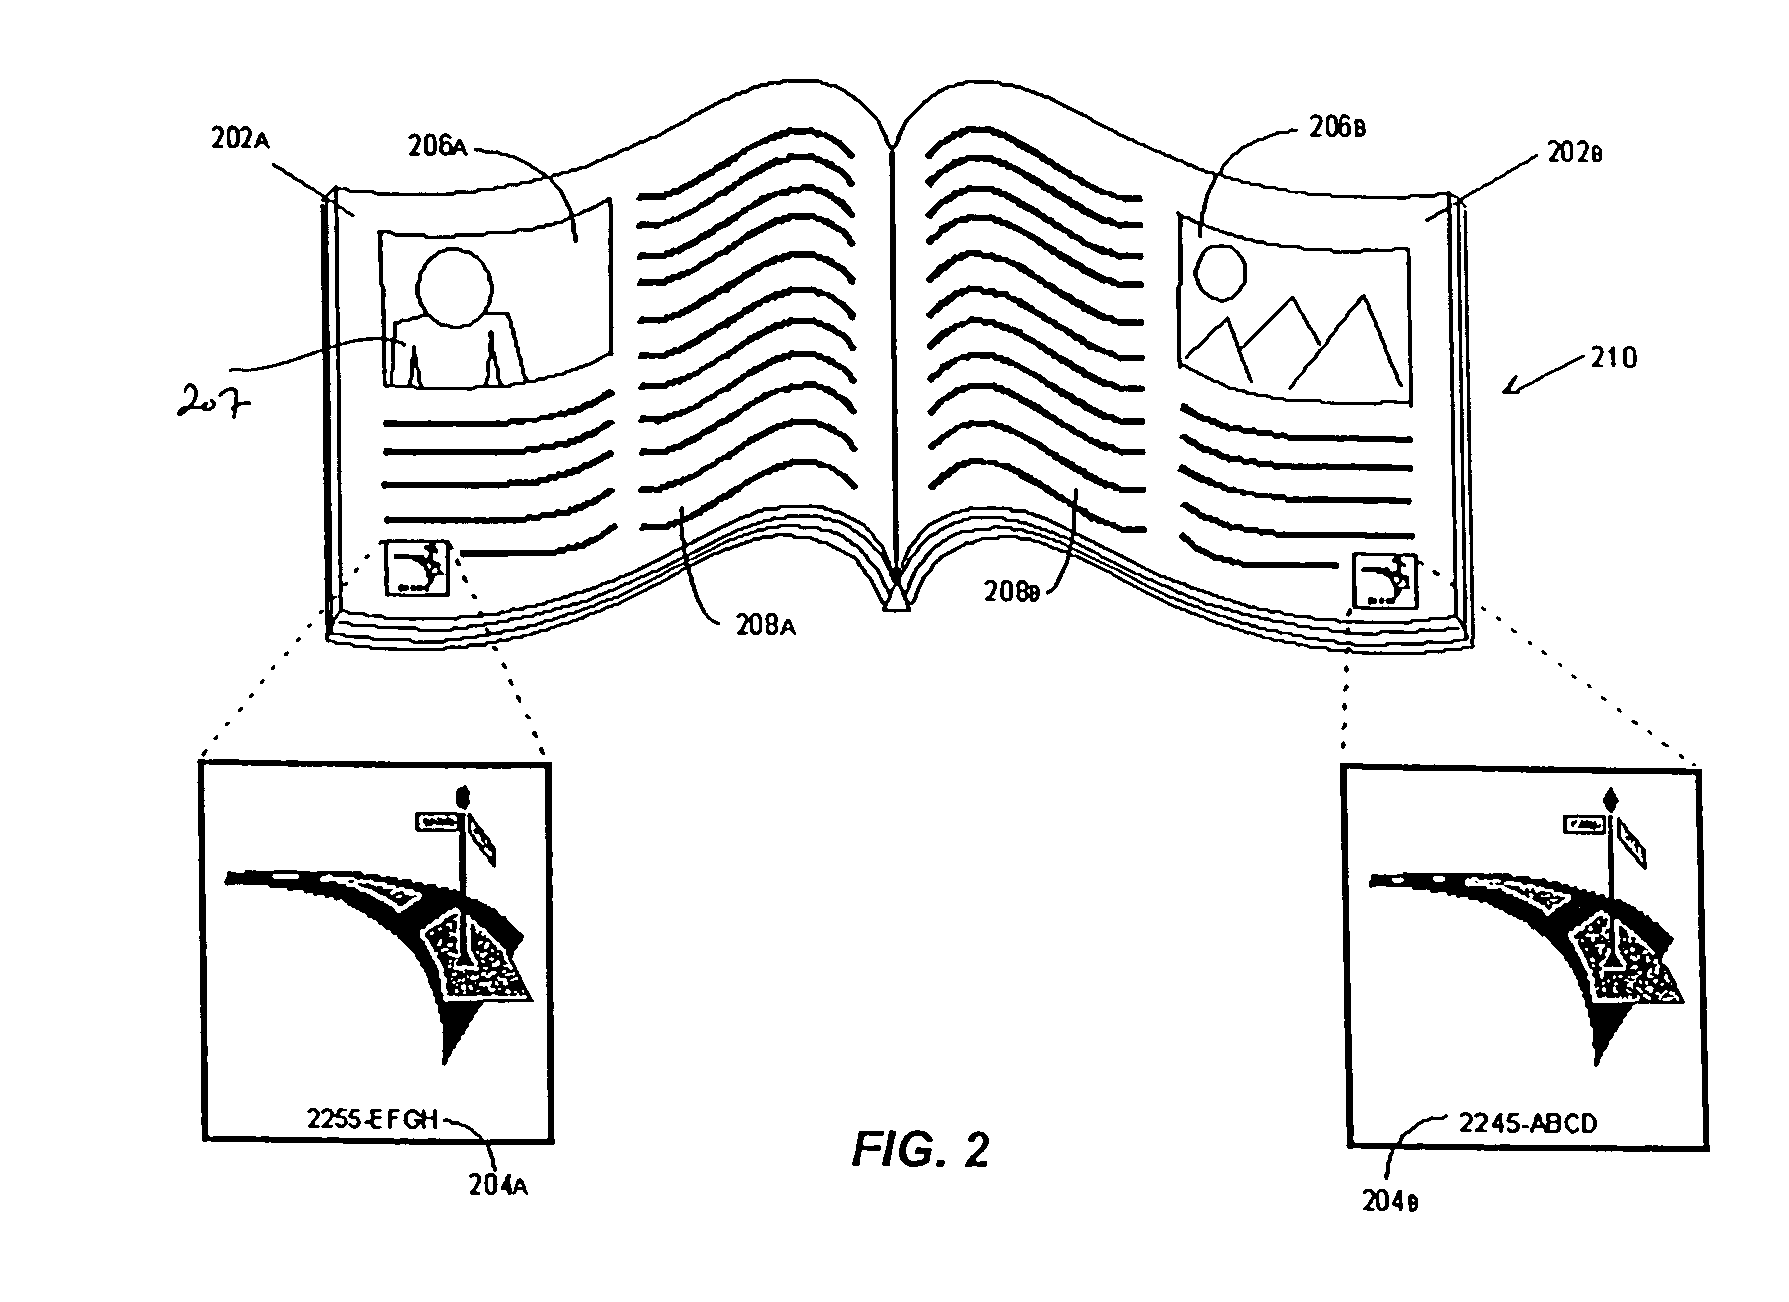 Method for determining effectiveness of display of objects in advertising images